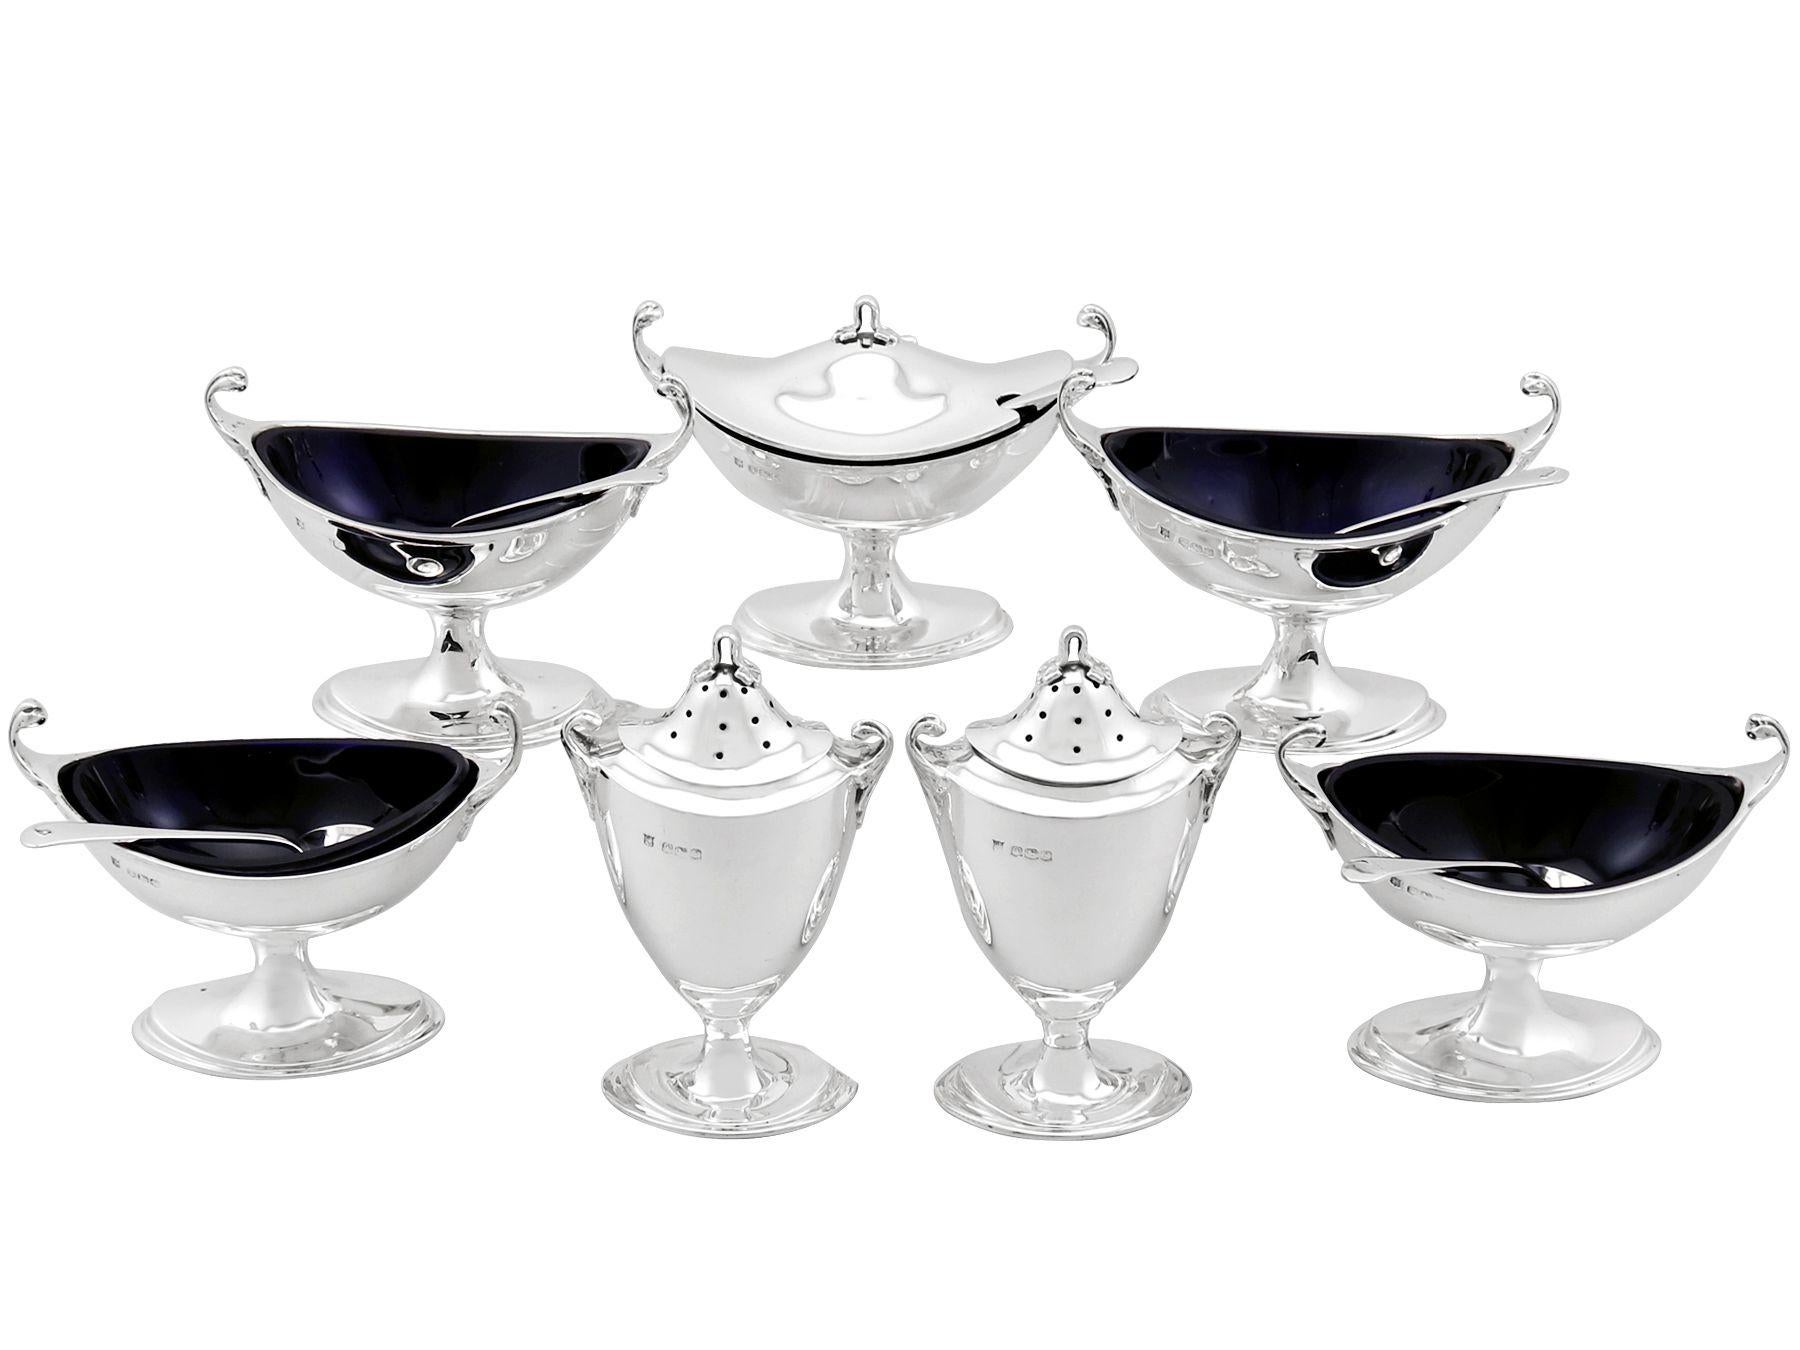 An exceptional, fine and impressive antique George V English sterling silver seven piece condiment / cruet set made in the Adams style - boxed; an addition to our dining silverware collection.

This exceptional antique George V 7 piece condiment set